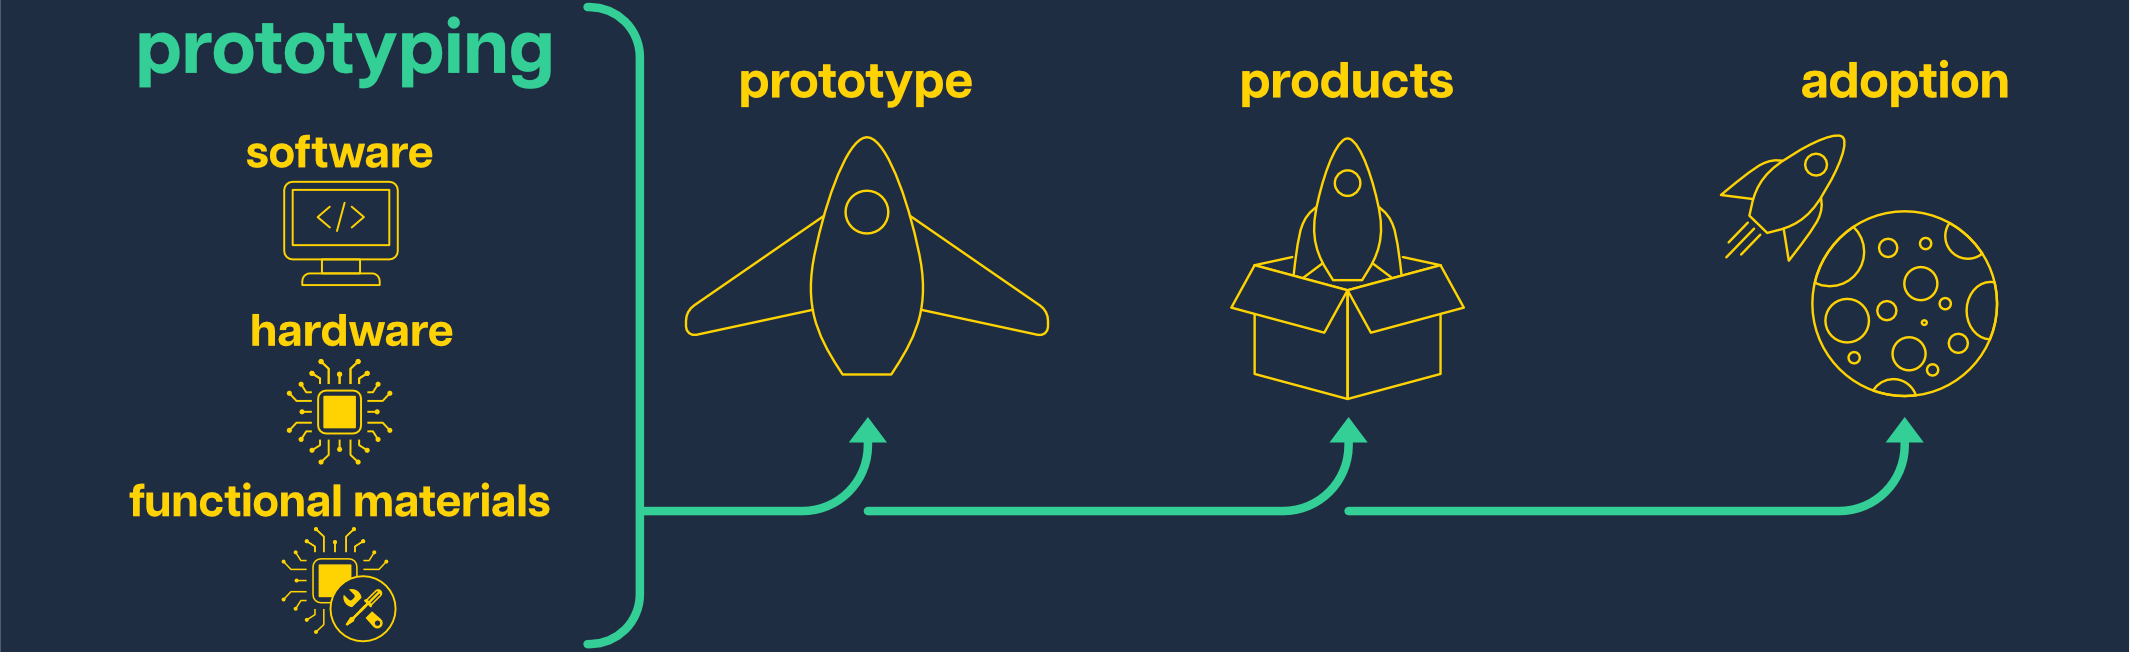 An infographic with a navy background. On the left from top to bottom is the text 'Prototyping', followed by three sub-categories in yellow: software, hardware, and functional materials with icons representing them. Next, from left to right across the infographic are three rockets in yellow. The first has a poor design and is labelled 'prototype'. Next is a rocket above a box labelled 'products, and finally a rocket flying over the moon labelled 'adoption'. Arrows move from left to right indicating development of the rockets.